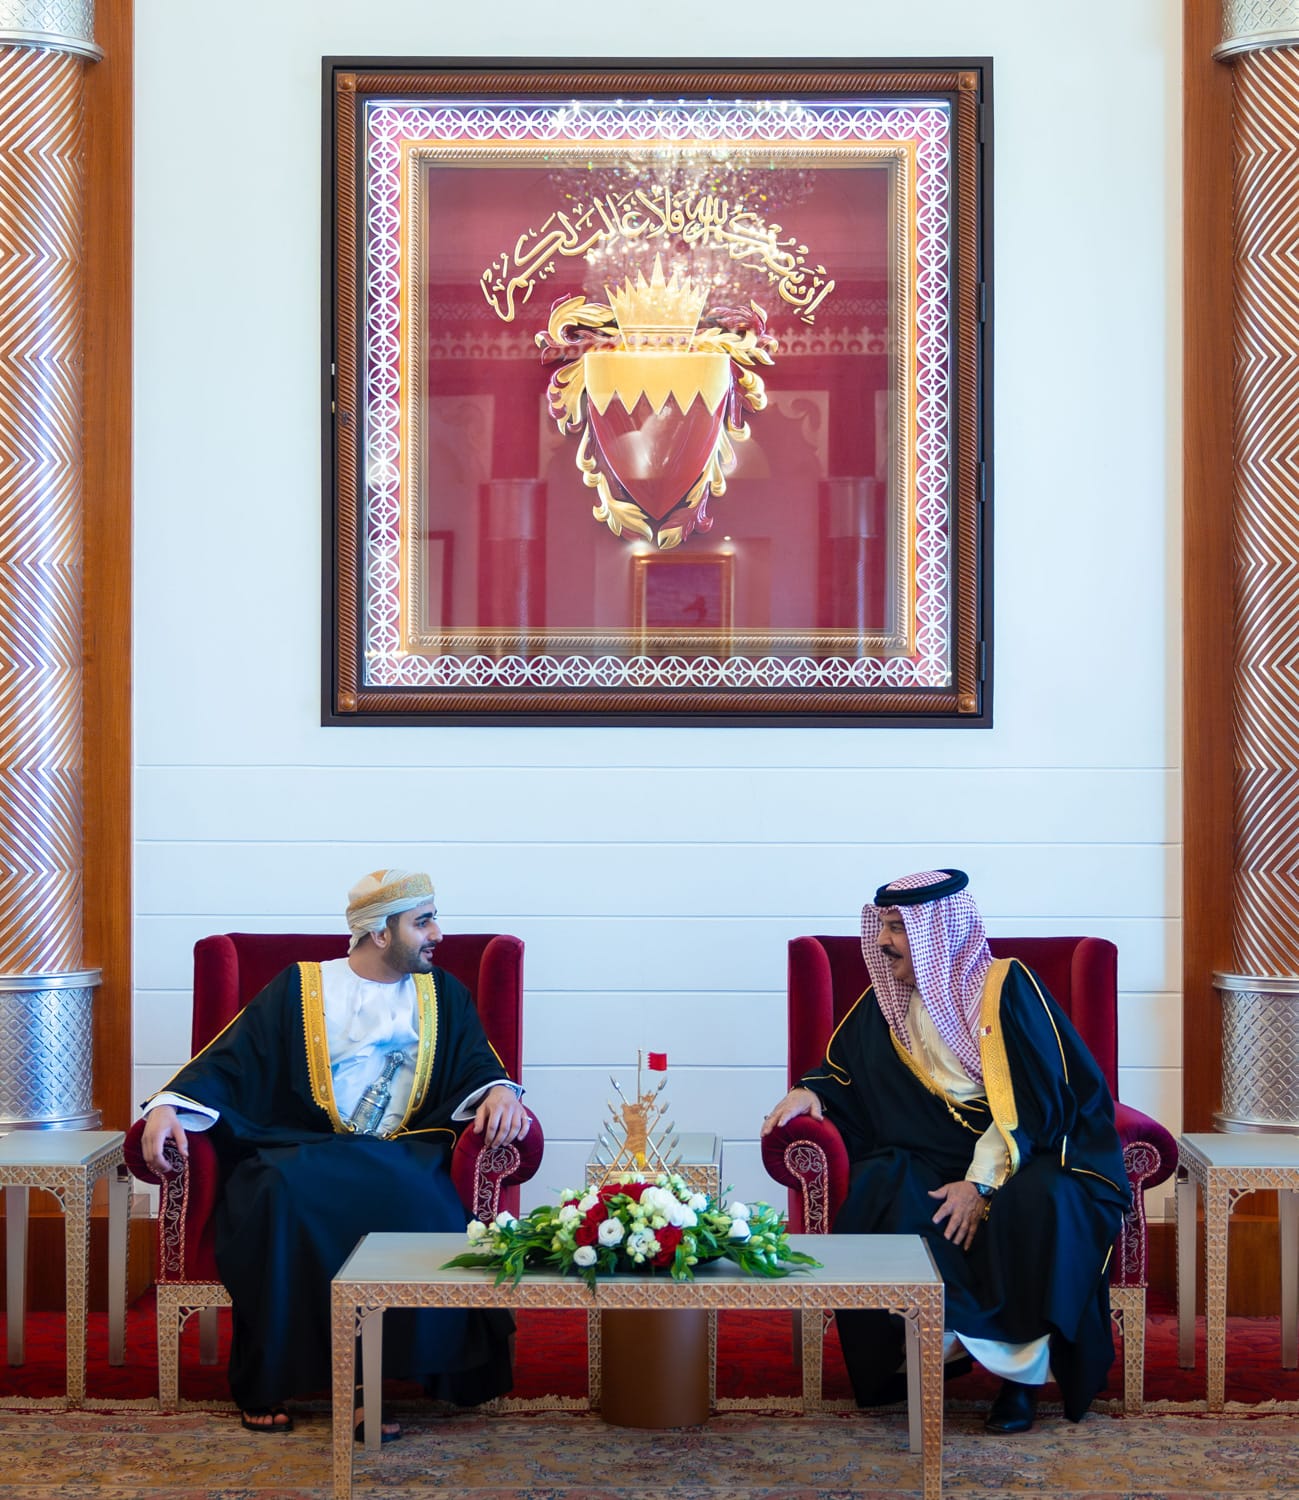 His Majesty King Hamad bin Isa Al Khalifa, King of the Kingdom of Bahrain, received His Highness Sayyid Dhi Yazan bin Haitham Al Said at Al Safriya Palace in the capital, Manama, this evening. During the interview, His Highness conveyed the greetings of His Majesty Sultan Haitham